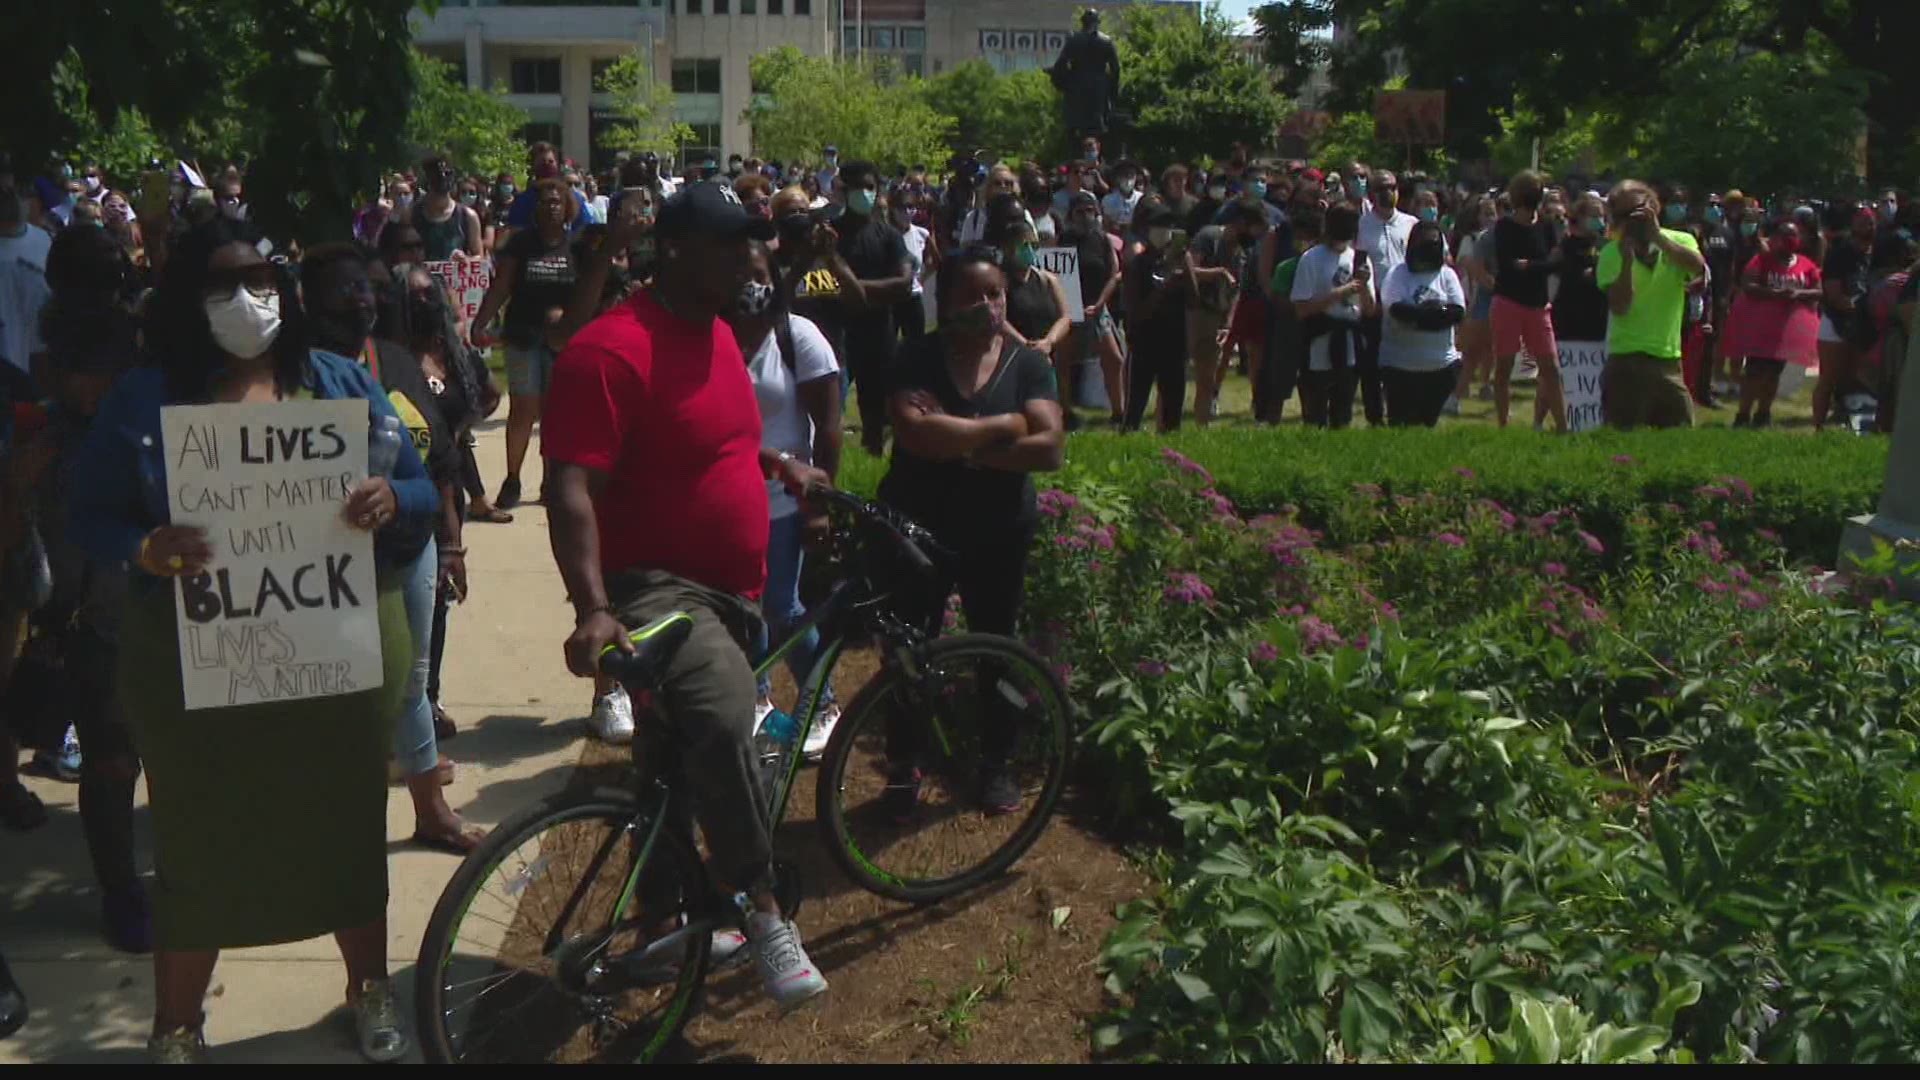 On the lawn of the State House Sunday, protesters gathered by the hundreds to rally against police brutality and encourage people to vote.